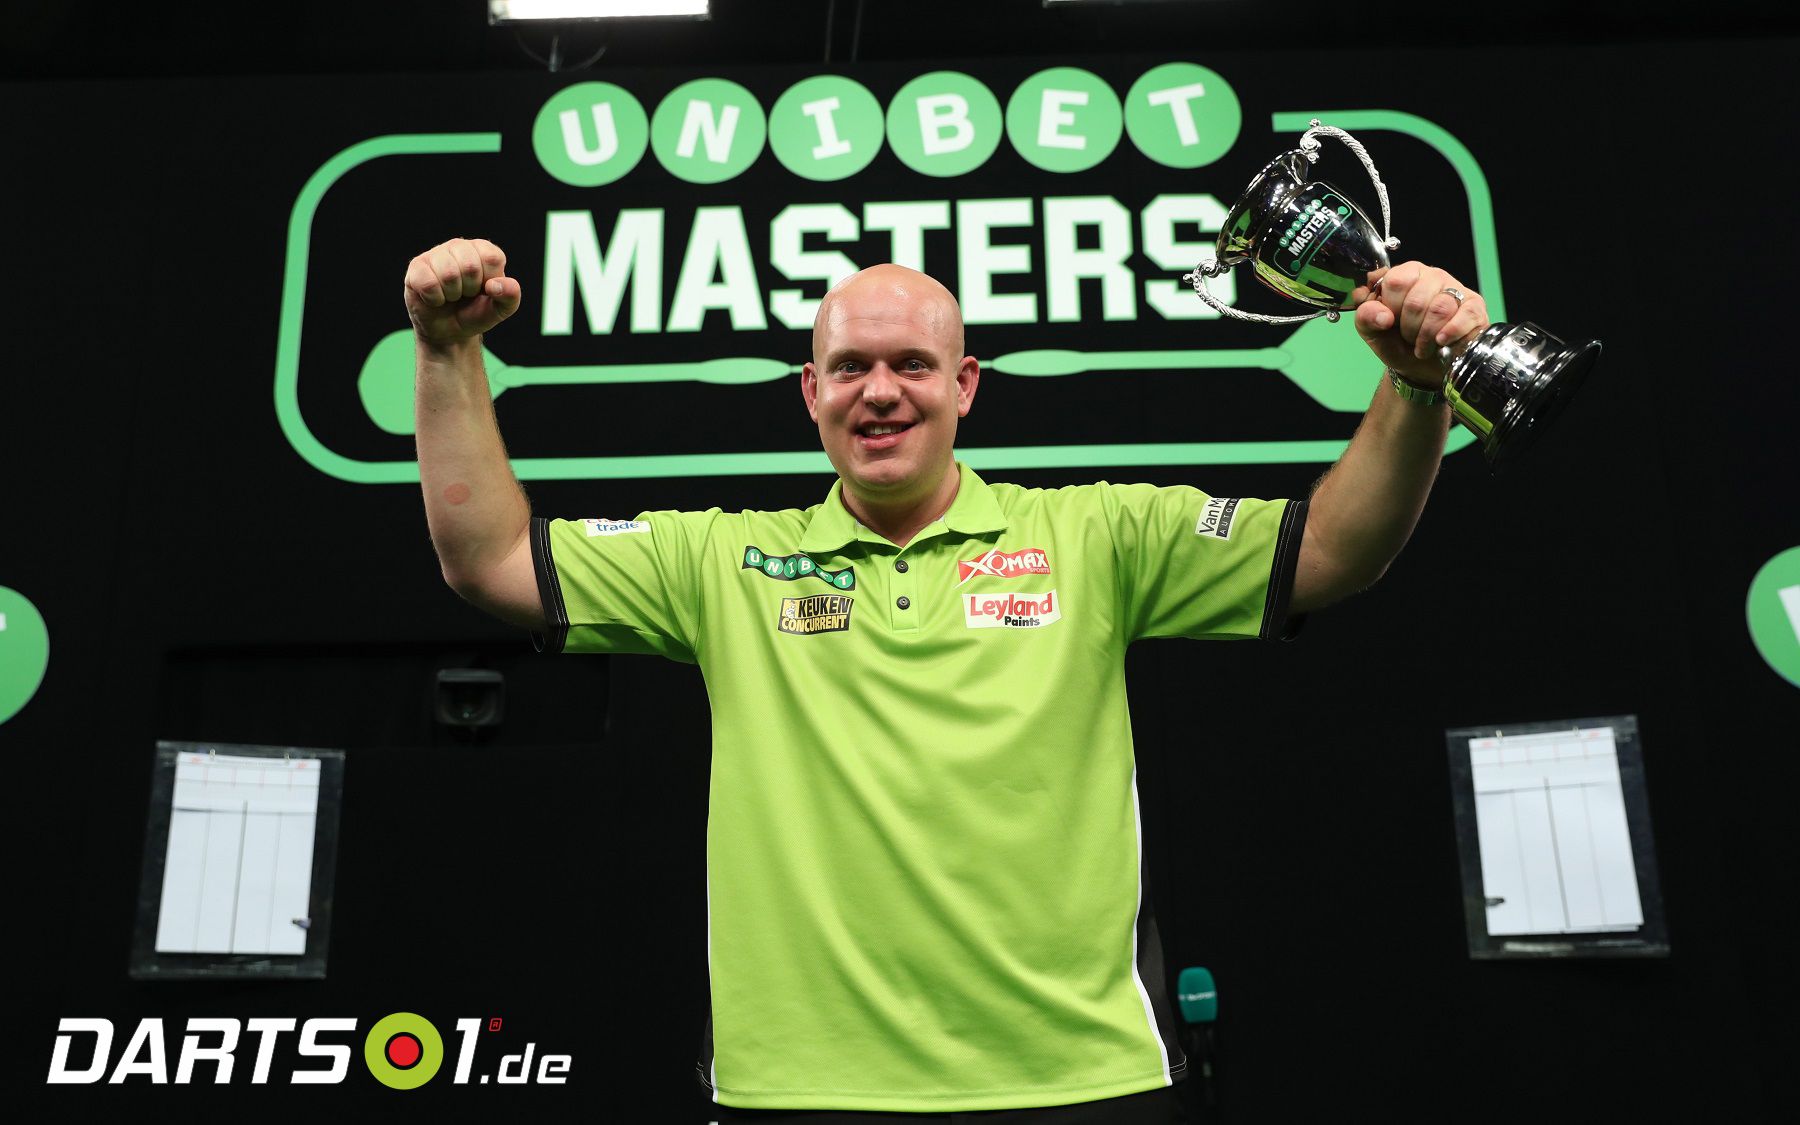 PDC Darts Masters 2019